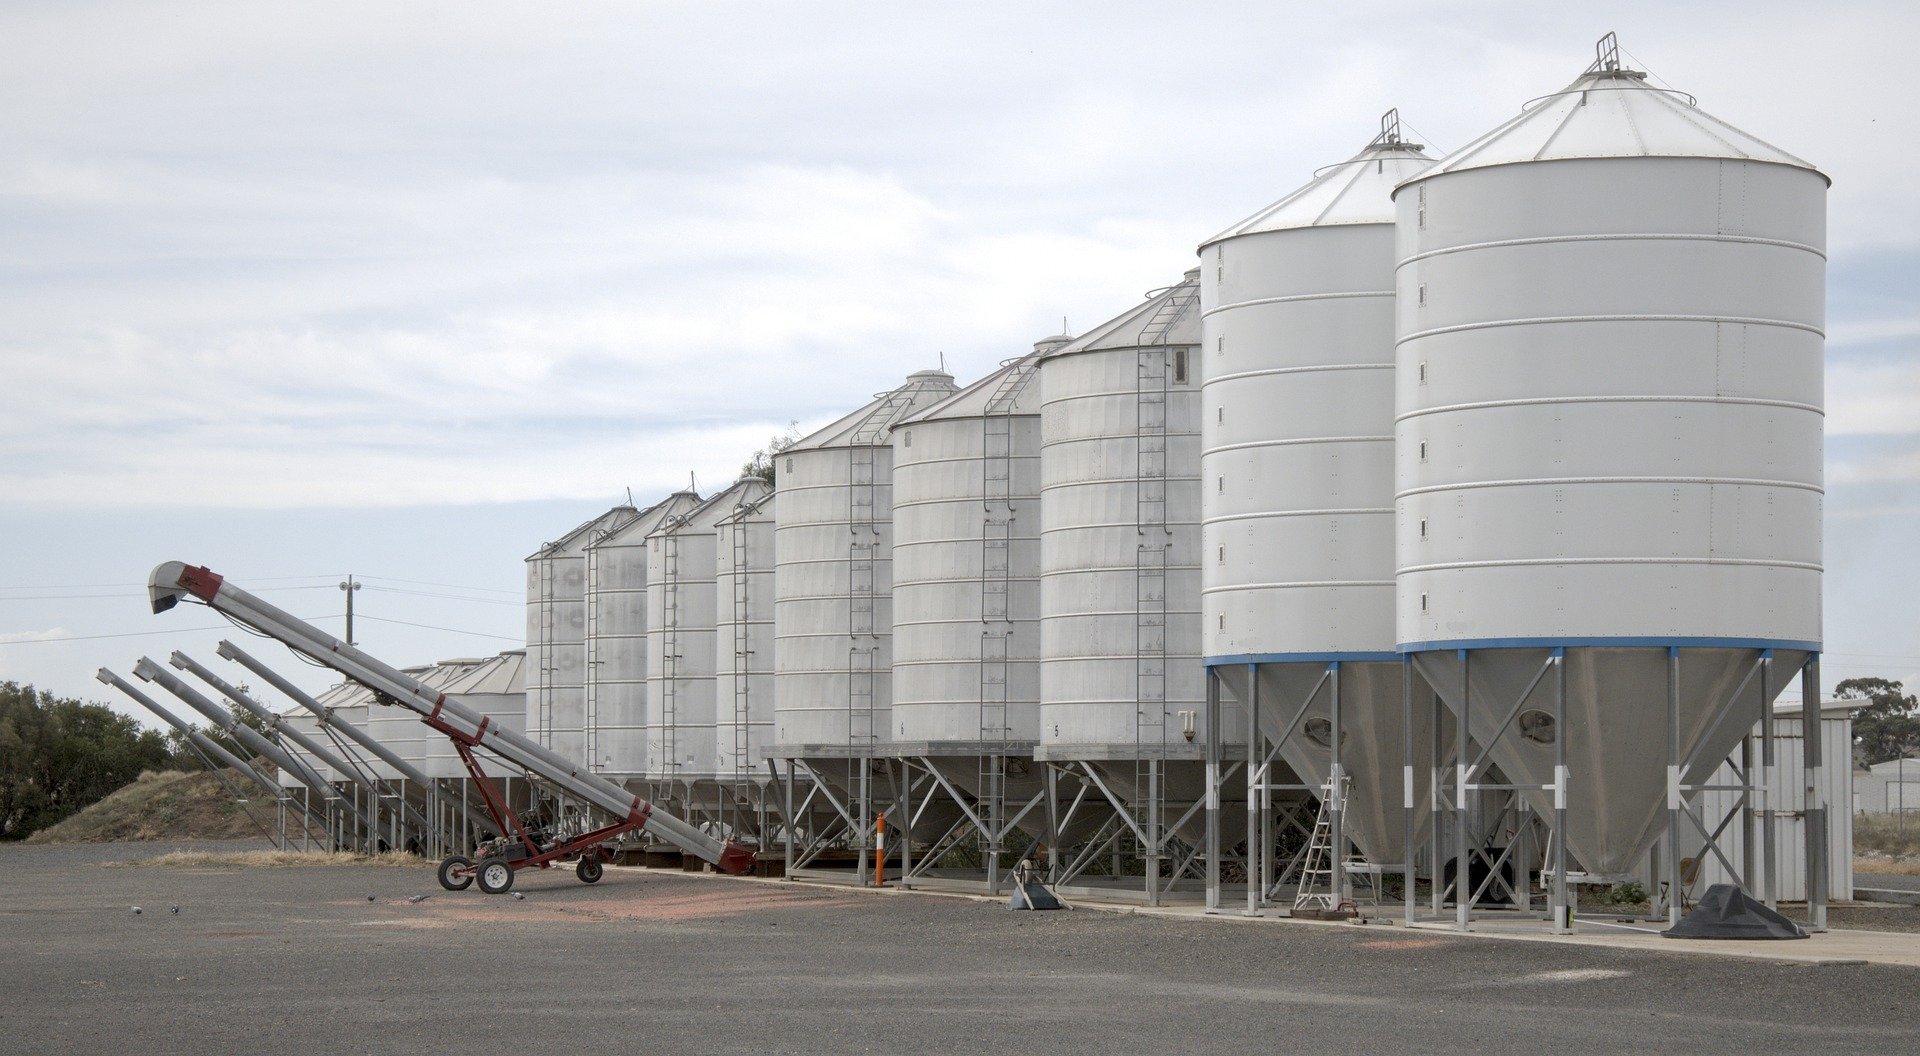 Terabee Blog Silo monitoring: Grain, animal feed and more